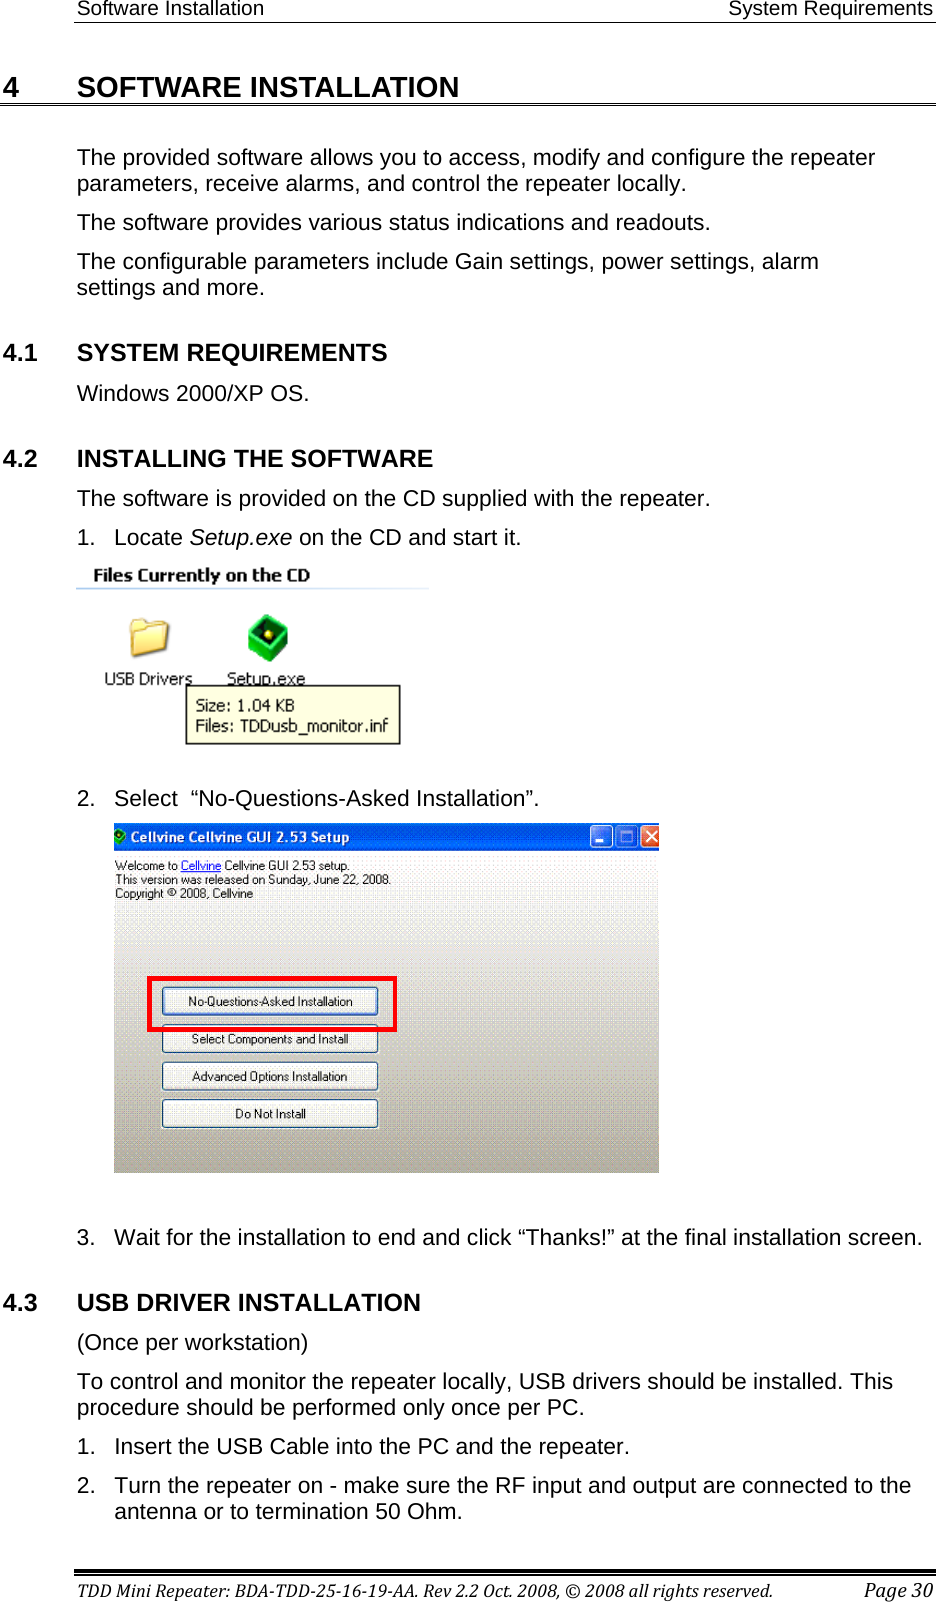 Software Installation System Requirements TDD Mini Repeater: BDA-TDD-25-16-19-AA. Rev 2.2 Oct. 2008, © 2008 all rights reserved.  Page 30 4  SOFTWARE INSTALLATION The provided software allows you to access, modify and configure the repeater parameters, receive alarms, and control the repeater locally.  The software provides various status indications and readouts.  The configurable parameters include Gain settings, power settings, alarm settings and more.   4.1  SYSTEM REQUIREMENTS Windows 2000/XP OS. 4.2  INSTALLING THE SOFTWARE The software is provided on the CD supplied with the repeater. 1.  Locate Setup.exe on the CD and start it.   2.  Select  “No-Questions-Asked Installation”.    3.  Wait for the installation to end and click “Thanks!” at the final installation screen.  4.3  USB DRIVER INSTALLATION (Once per workstation)  To control and monitor the repeater locally, USB drivers should be installed. This procedure should be performed only once per PC.  1.  Insert the USB Cable into the PC and the repeater.  2.  Turn the repeater on - make sure the RF input and output are connected to the antenna or to termination 50 Ohm.  